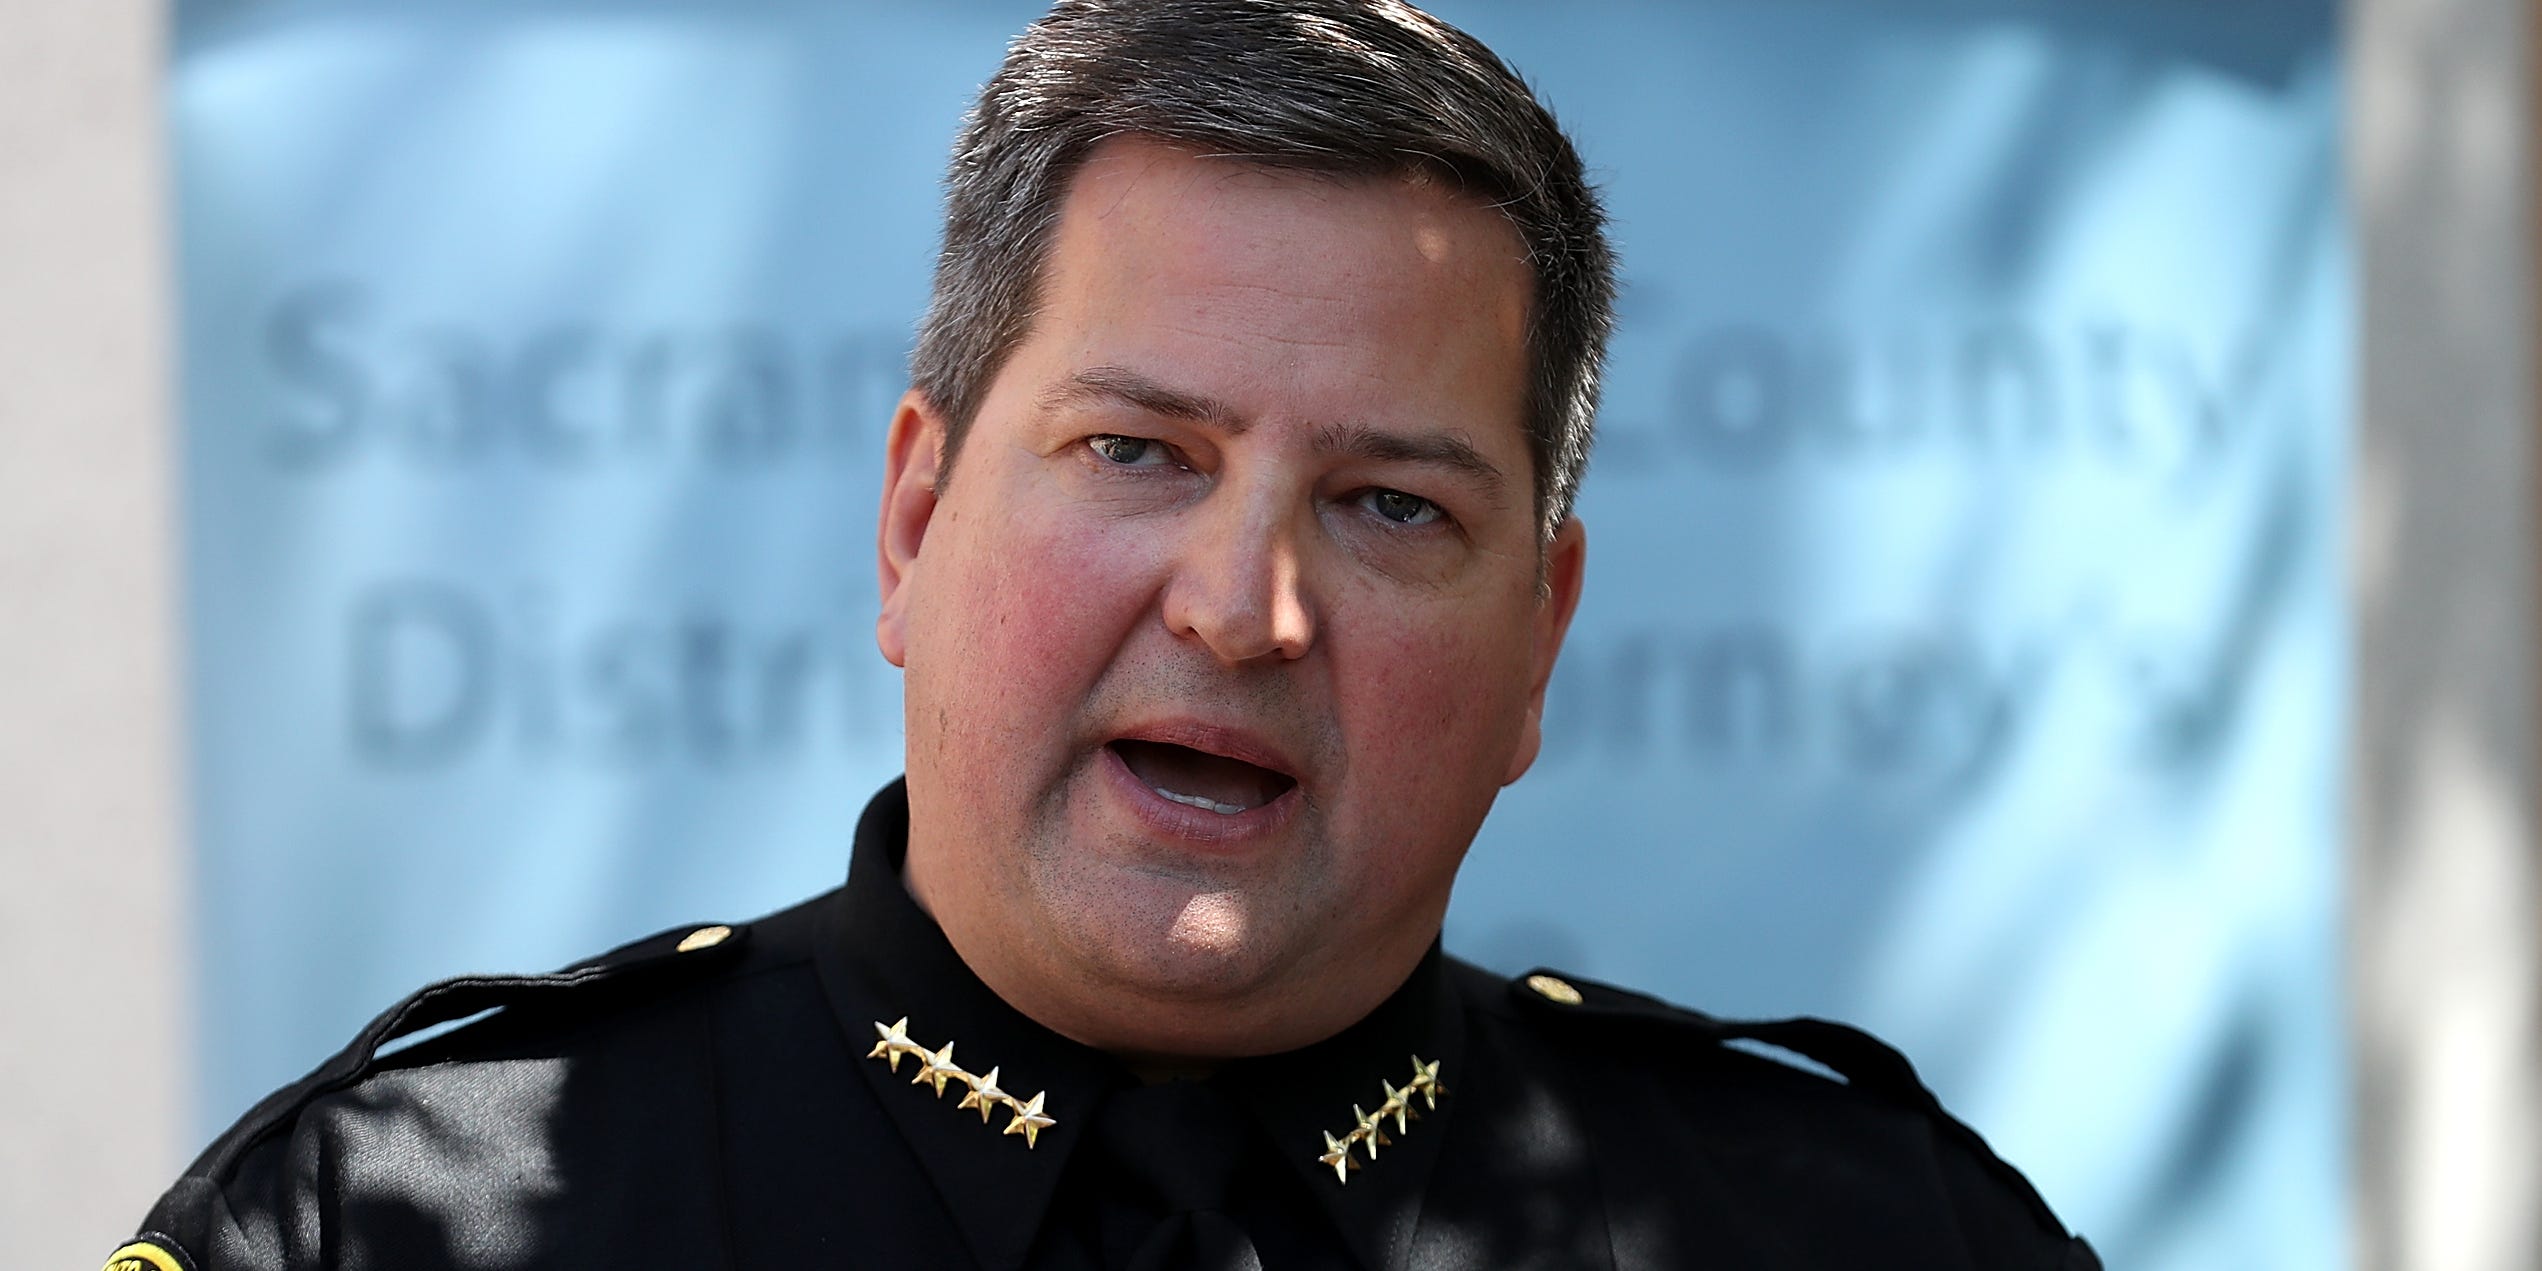 SACRAMENTO, CA - APRIL 25: Sacramento sheriff Scott Jones speaks about the arrest of accused rapist and killer Joseph James DeAngelo during a news conference on April 25, 2018 in Sacramento, California. Sacramento district attorney Anne Marie Schubert was joined by law enforcement officials from across California to announce the arrest of 72 year-old Joseph James DeAngelo who is believed to be the the East Area Rapist, also known as the Golden State Killer, who killed at least 12, raped over 45 people and burglarized hundreds of homes throughout California in the 1970s and 1980s. (Photo by Justin Sullivan/Getty Images)